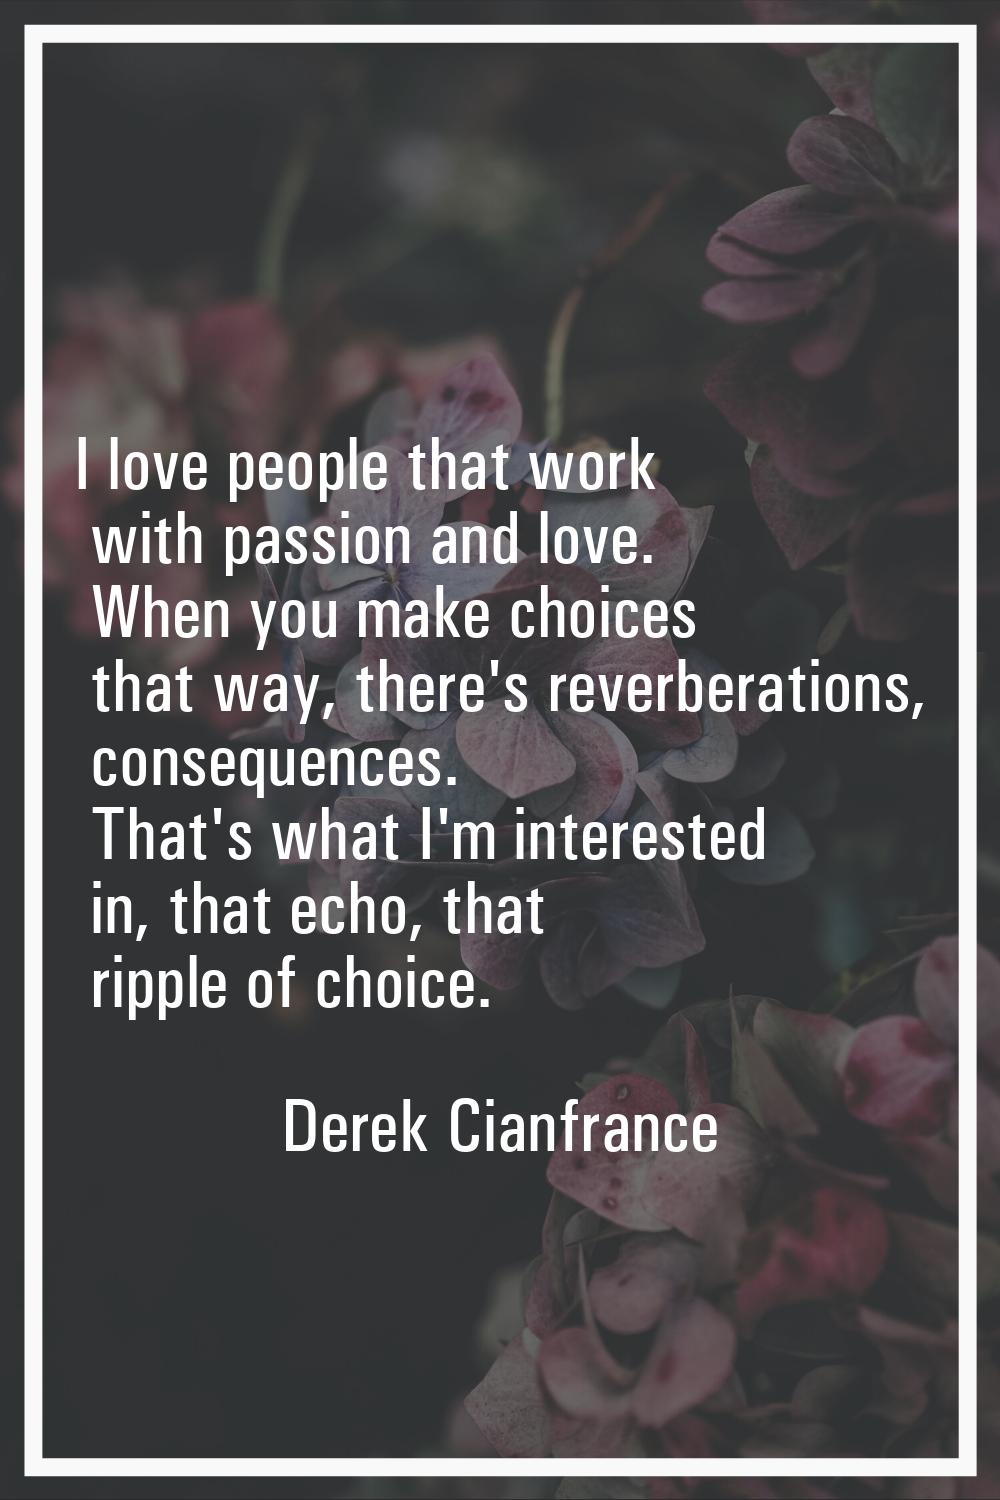 I love people that work with passion and love. When you make choices that way, there's reverberatio